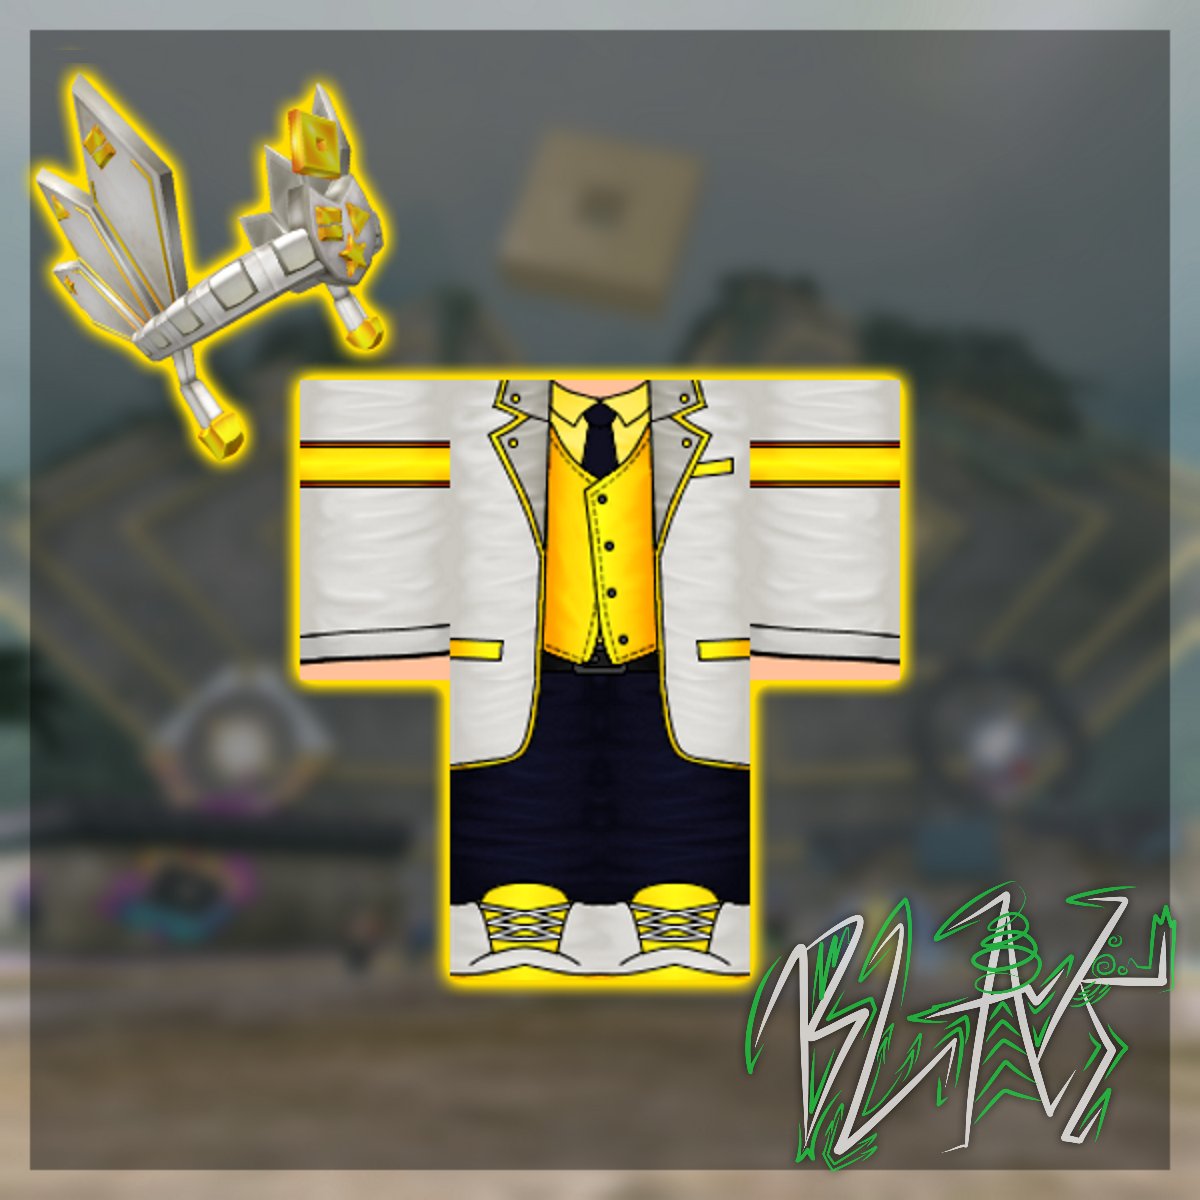 Greenblak On Twitter Made A Matching Suit For The Valkyrie Of The Metaverse Expect More Outfits Coming Soon Shirt Https T Co Ymcdjpqjwz Pants Https T Co 6xwbp1eish Blakdesigns Roblox Robloxclothing Desenvolvedorroblox Robloxclothes Https - roblox metaverse valk outfits